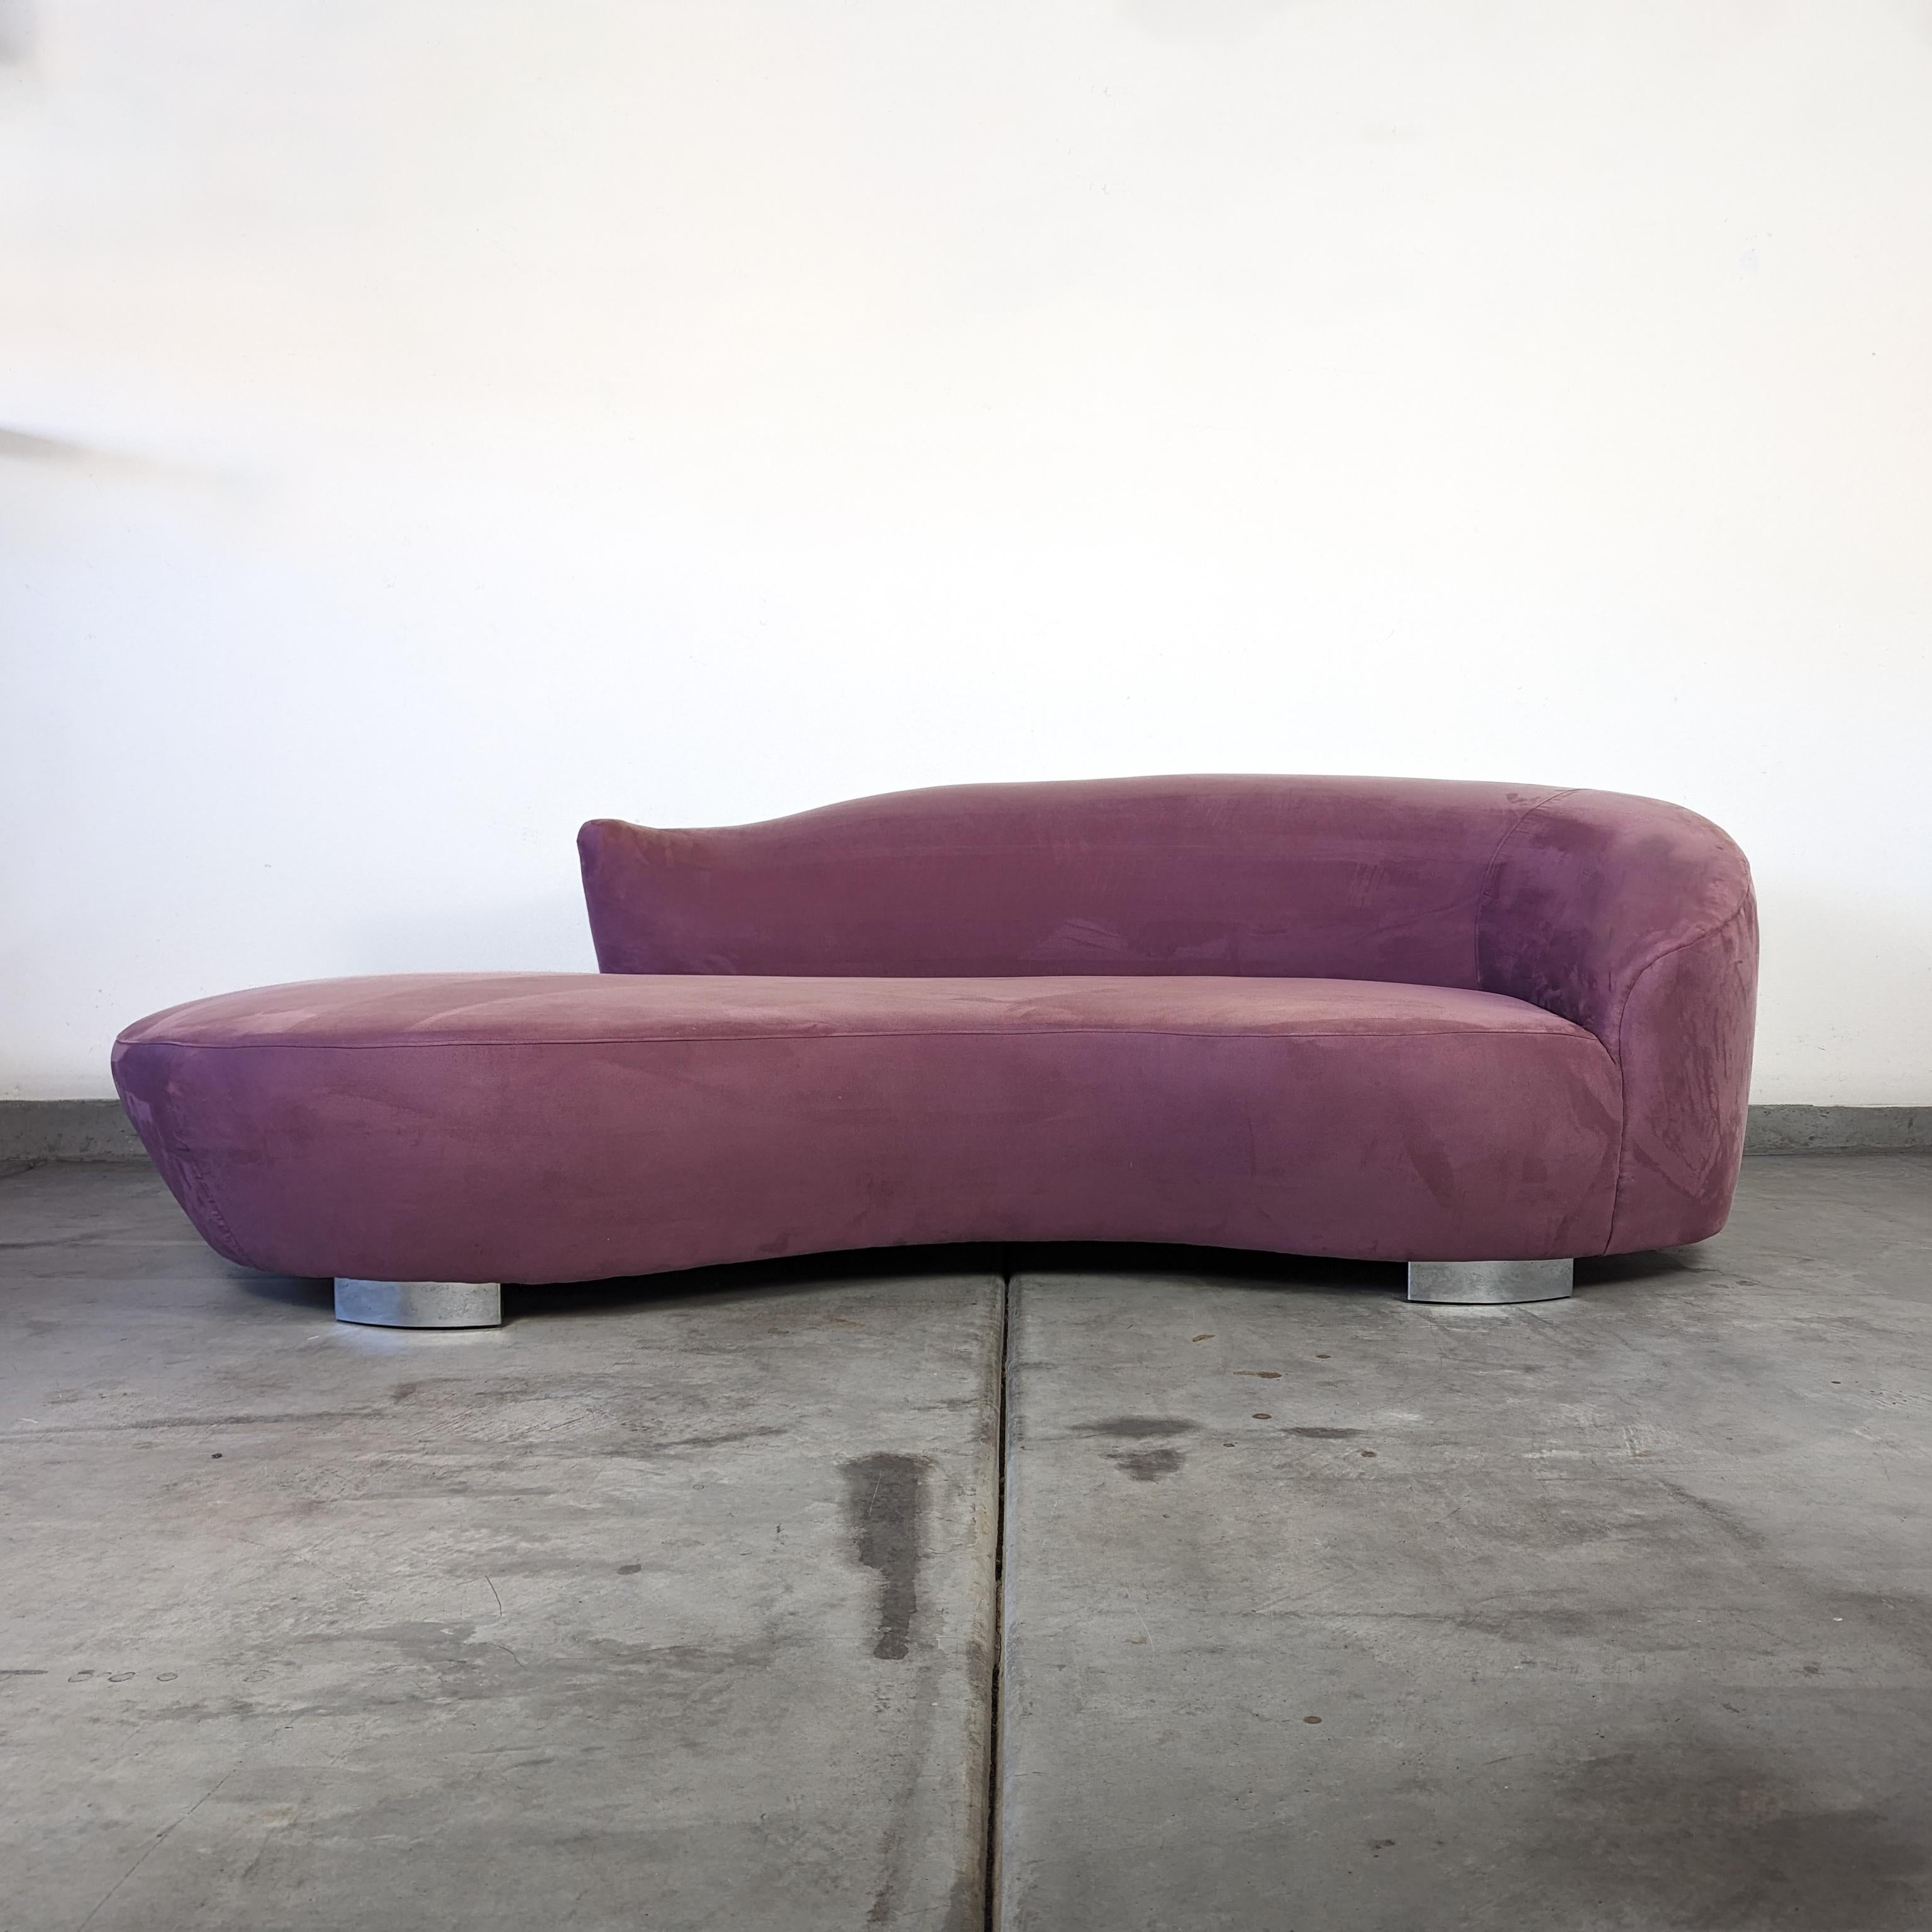 Late 20th Century Pair of Postmodern Mauve Pink Serpentine Cloud Sofas, c1990s For Sale